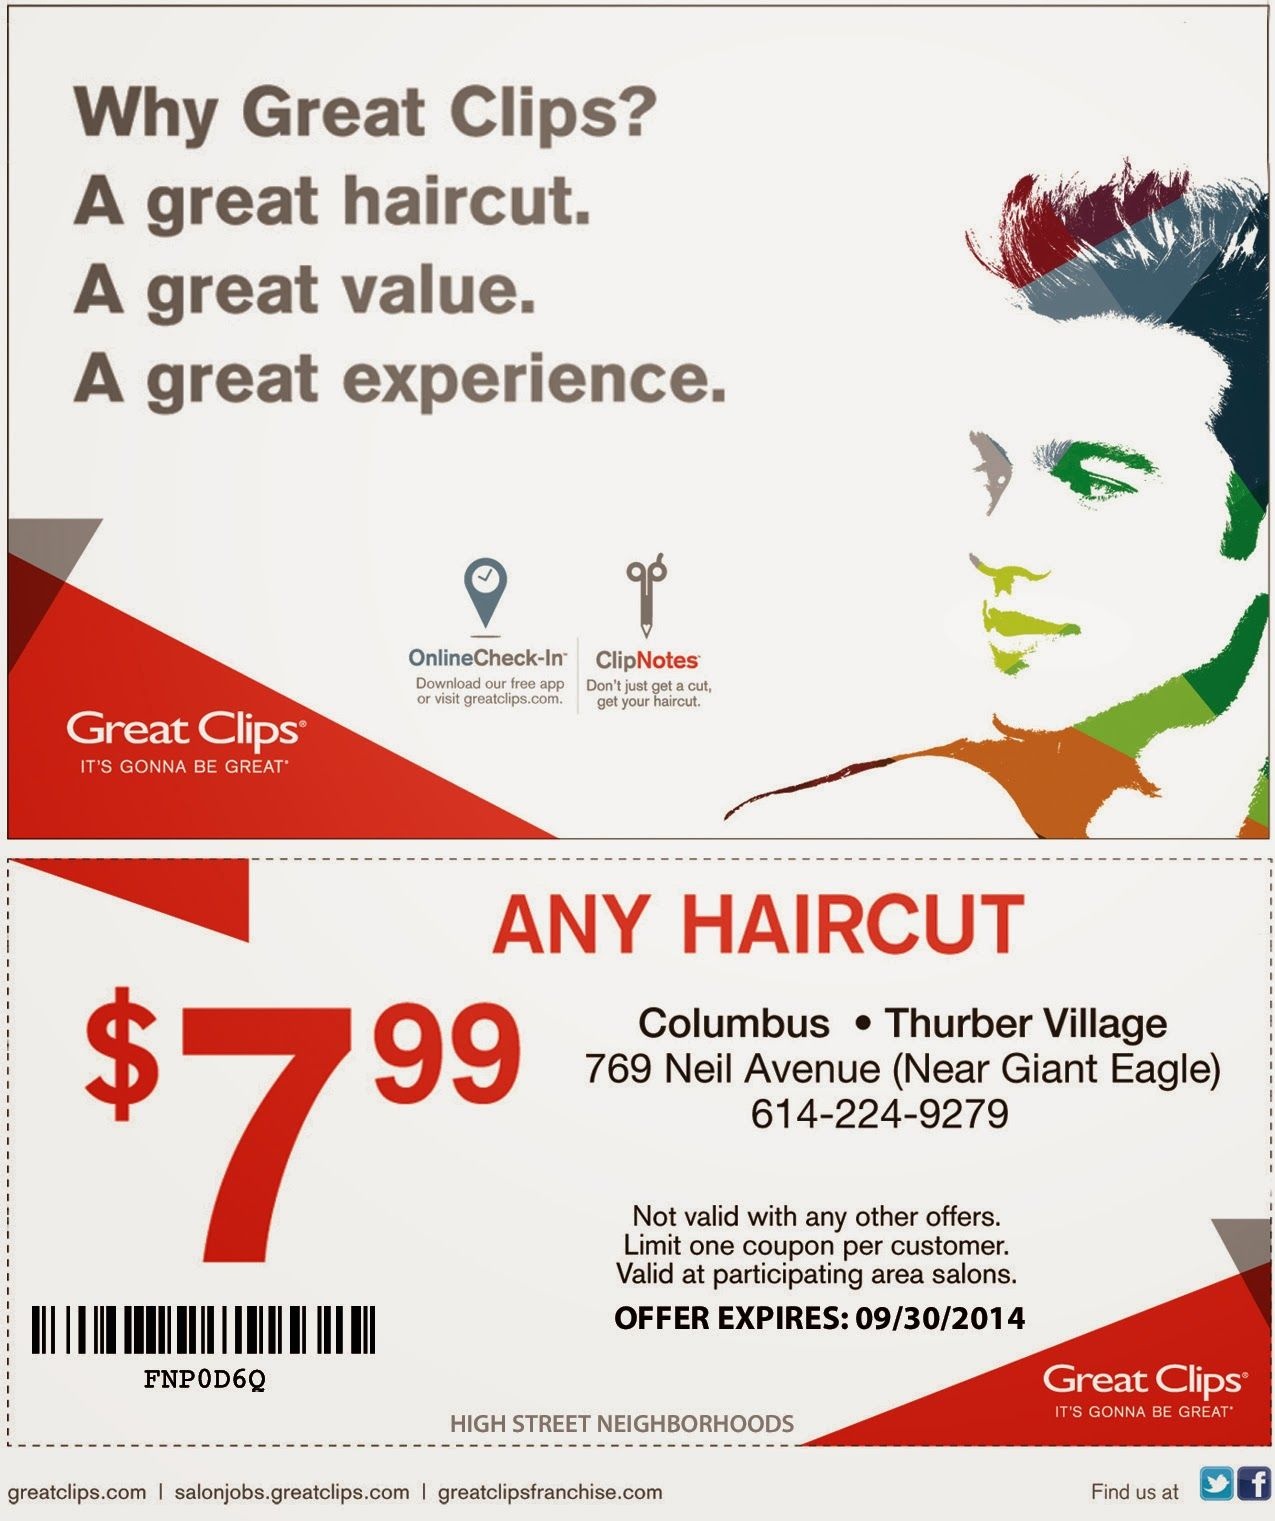 27 Great Clips Free Haircut Coupon | Hairstyles Ideas - Great Clips Free Coupons Printable